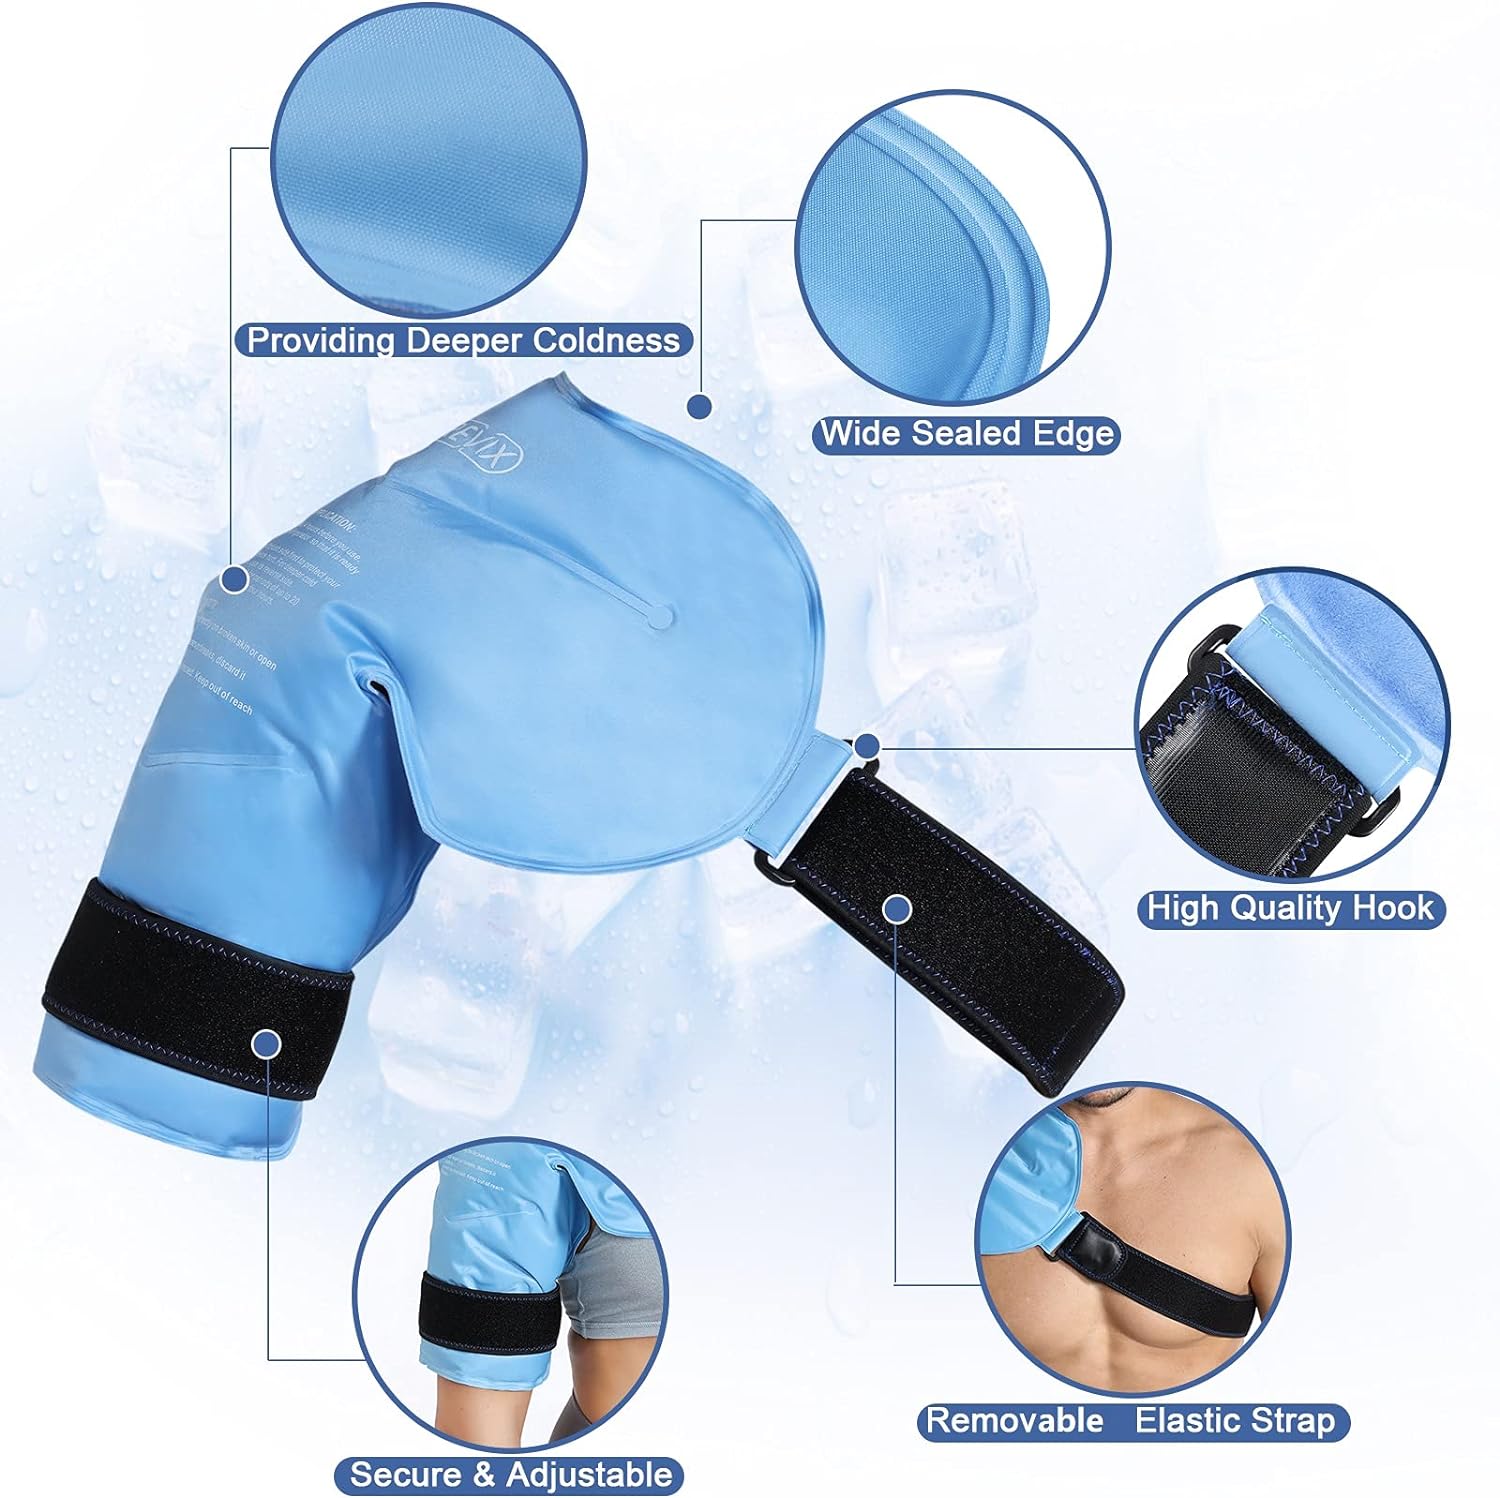 Synopsis: REVIX Shoulder Ice Pack Rotator Cuff Cold Therapy Wraps